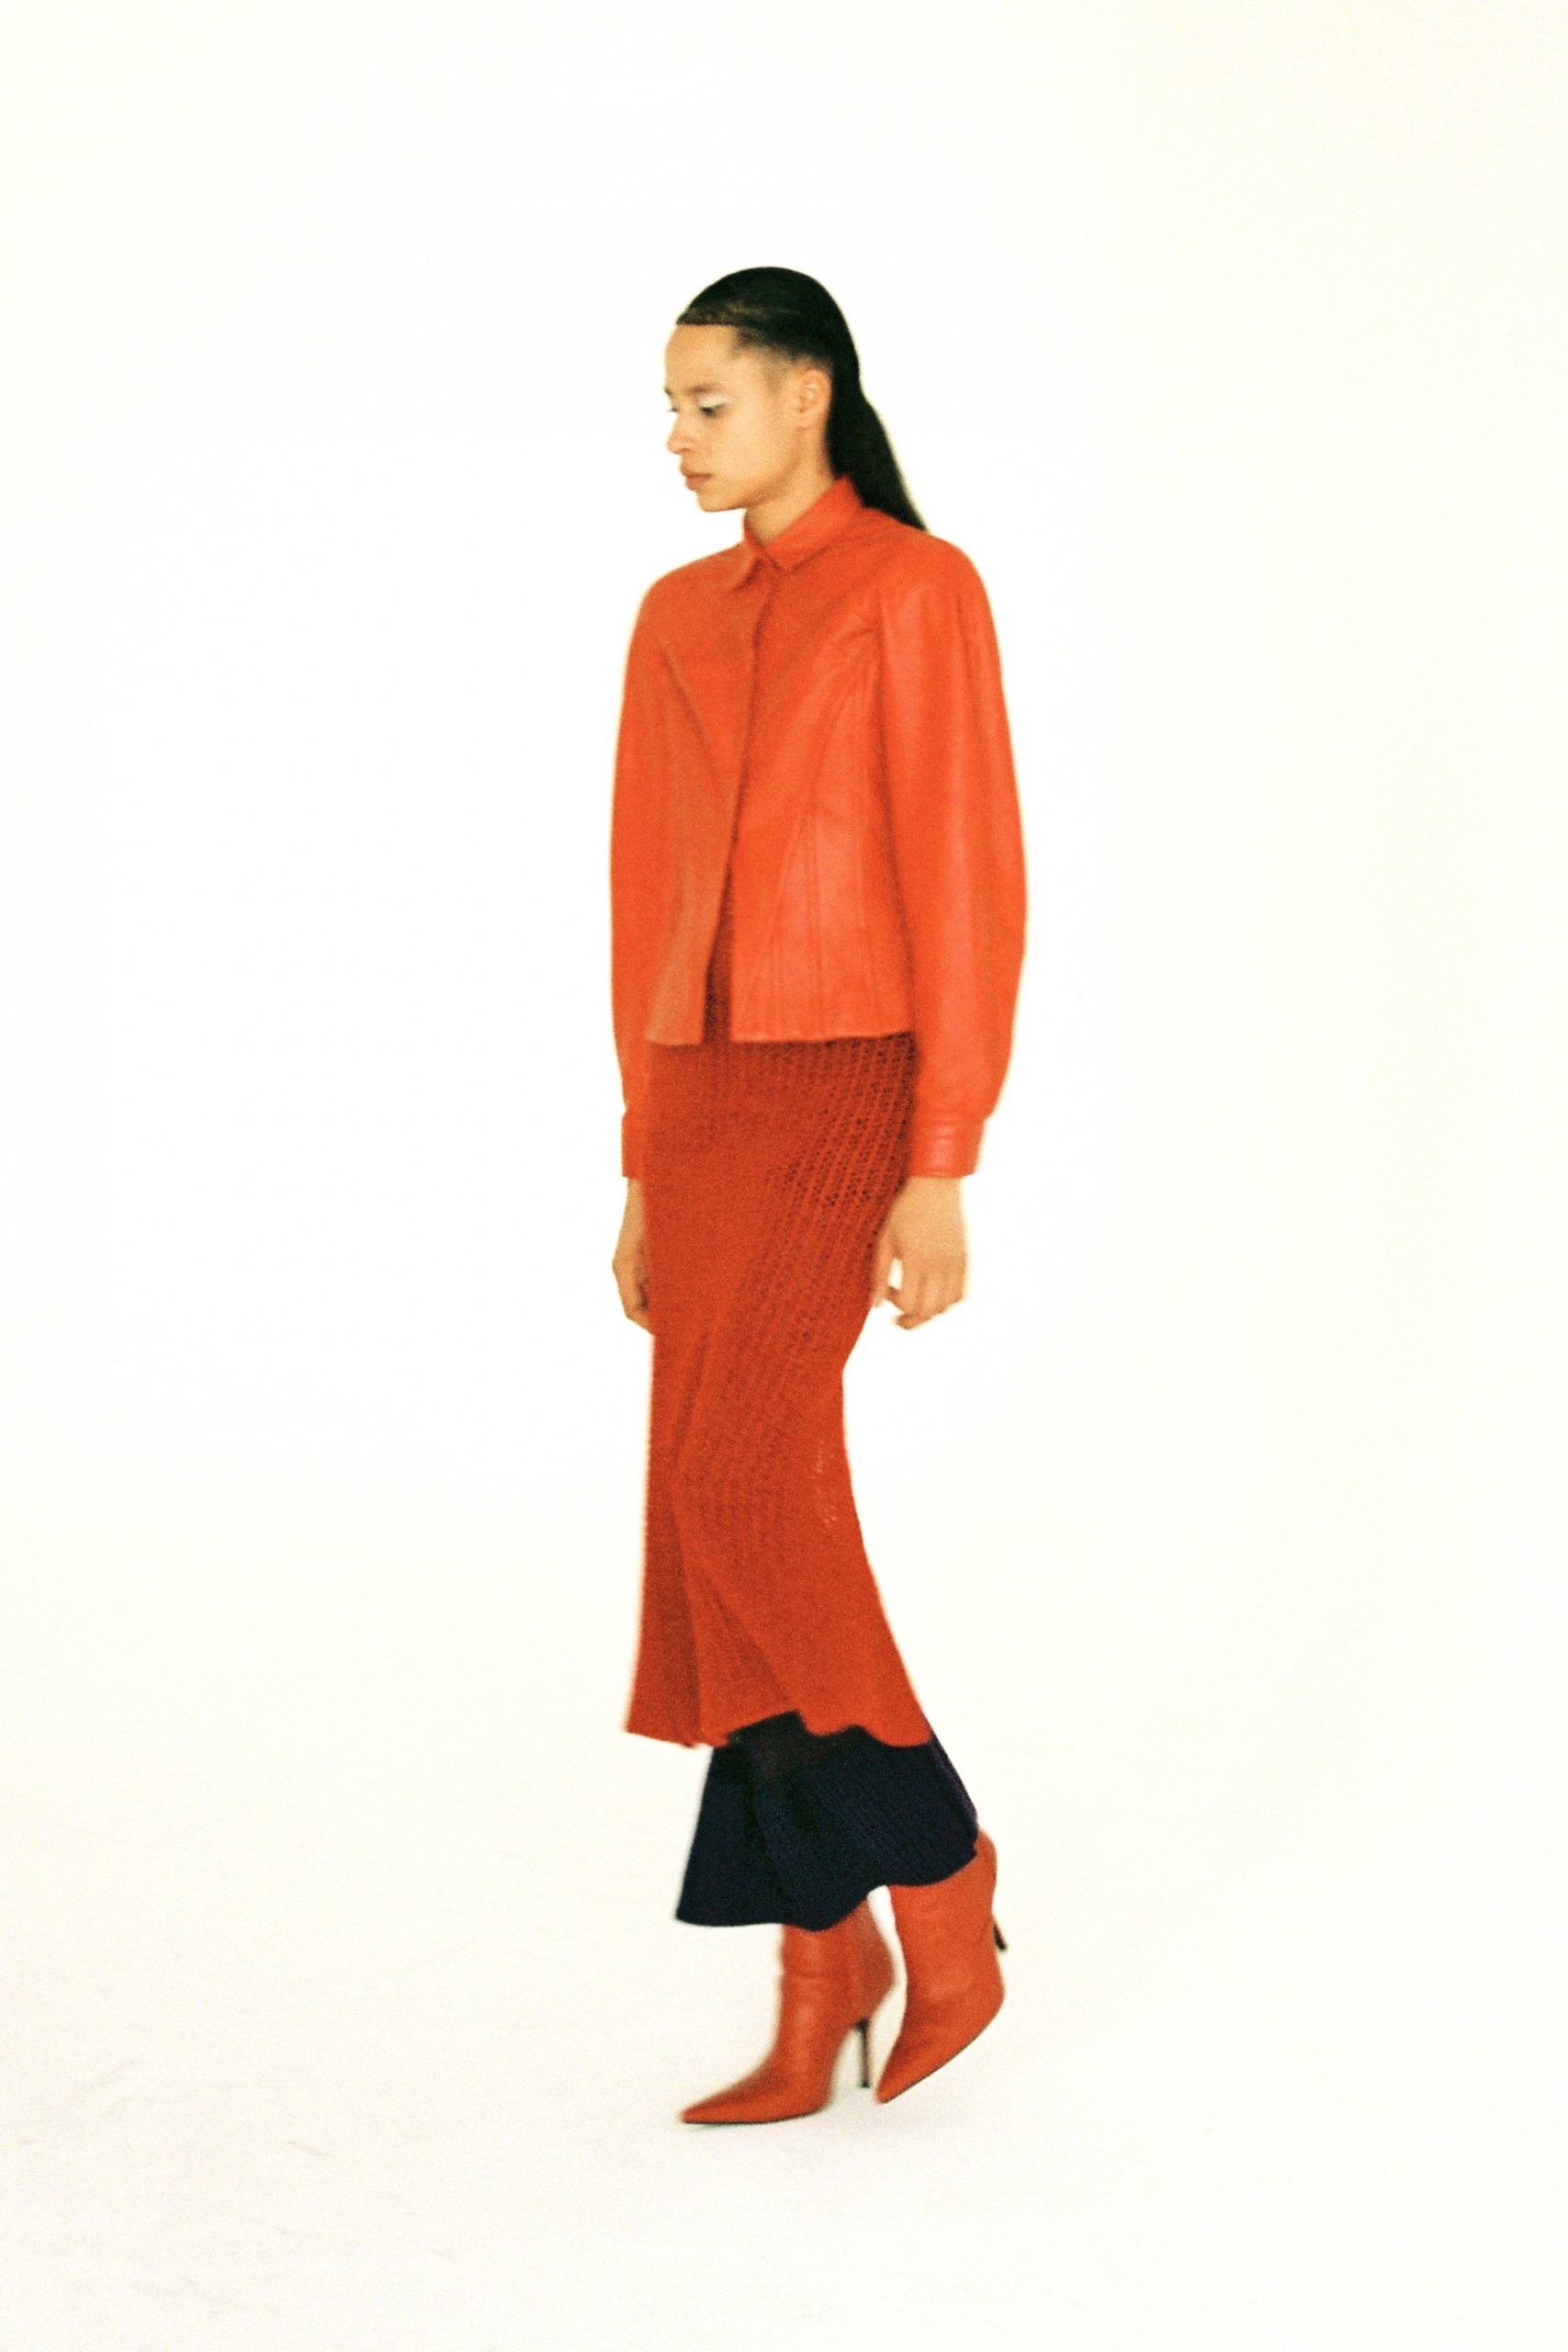 SITUATIONIST SS23 LOOK BOOK BY DAVIT GIORGADZE LOOK 01